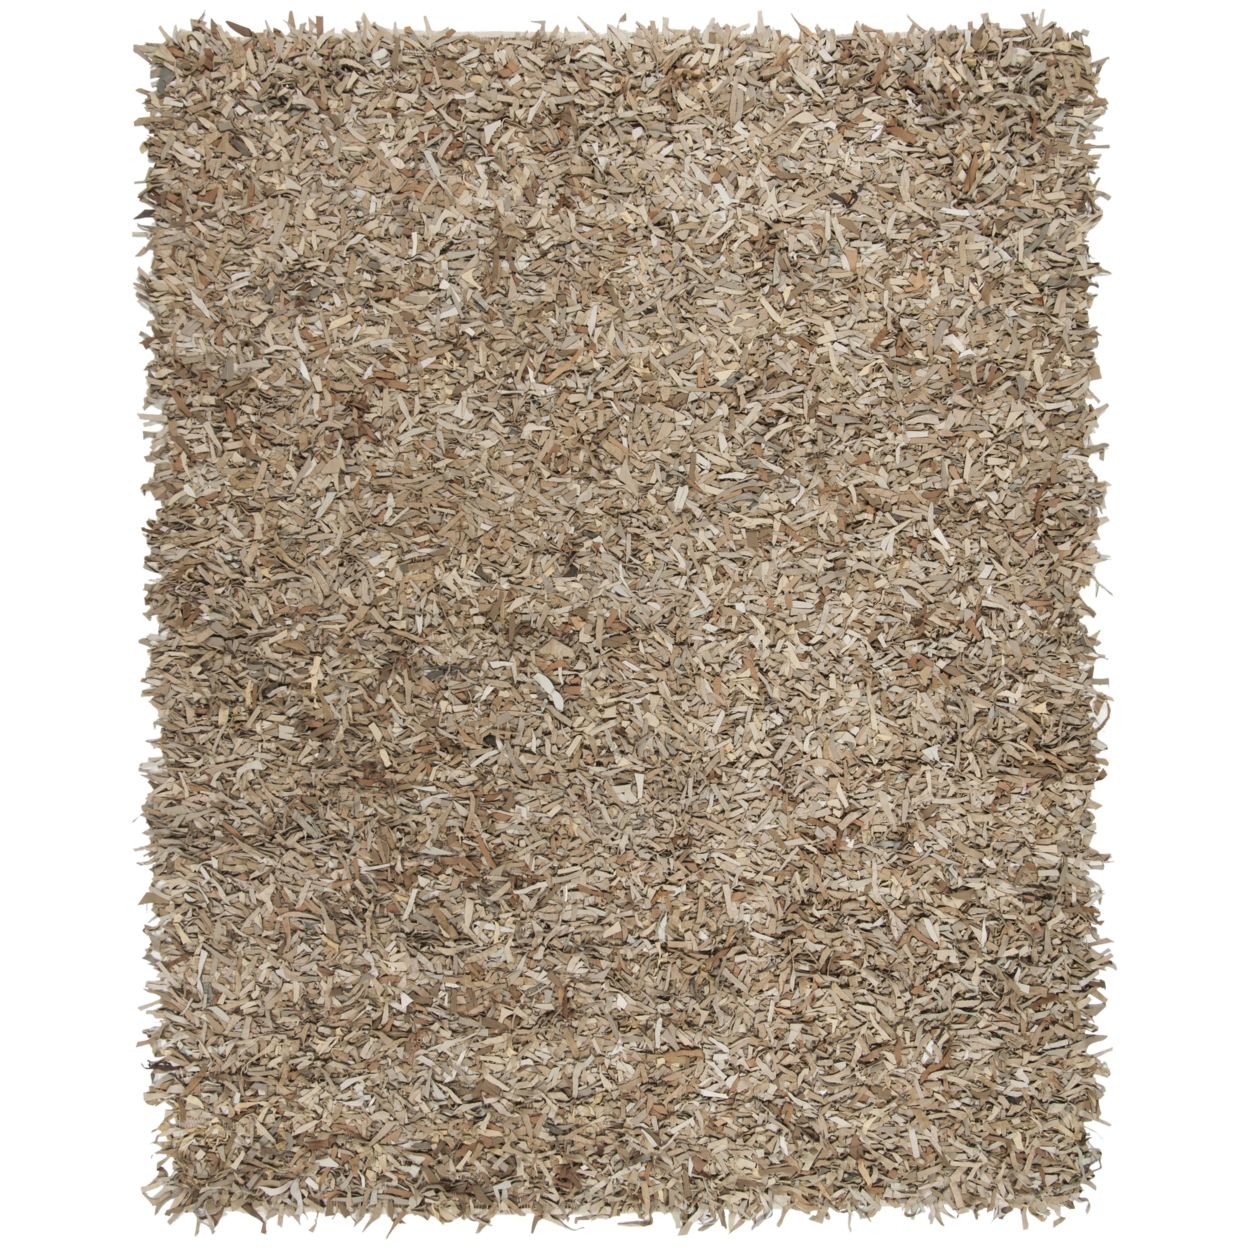 SAFAVIEH Leather Shag LSG601H Hand-knotted Beige Rug - 8' X 10'